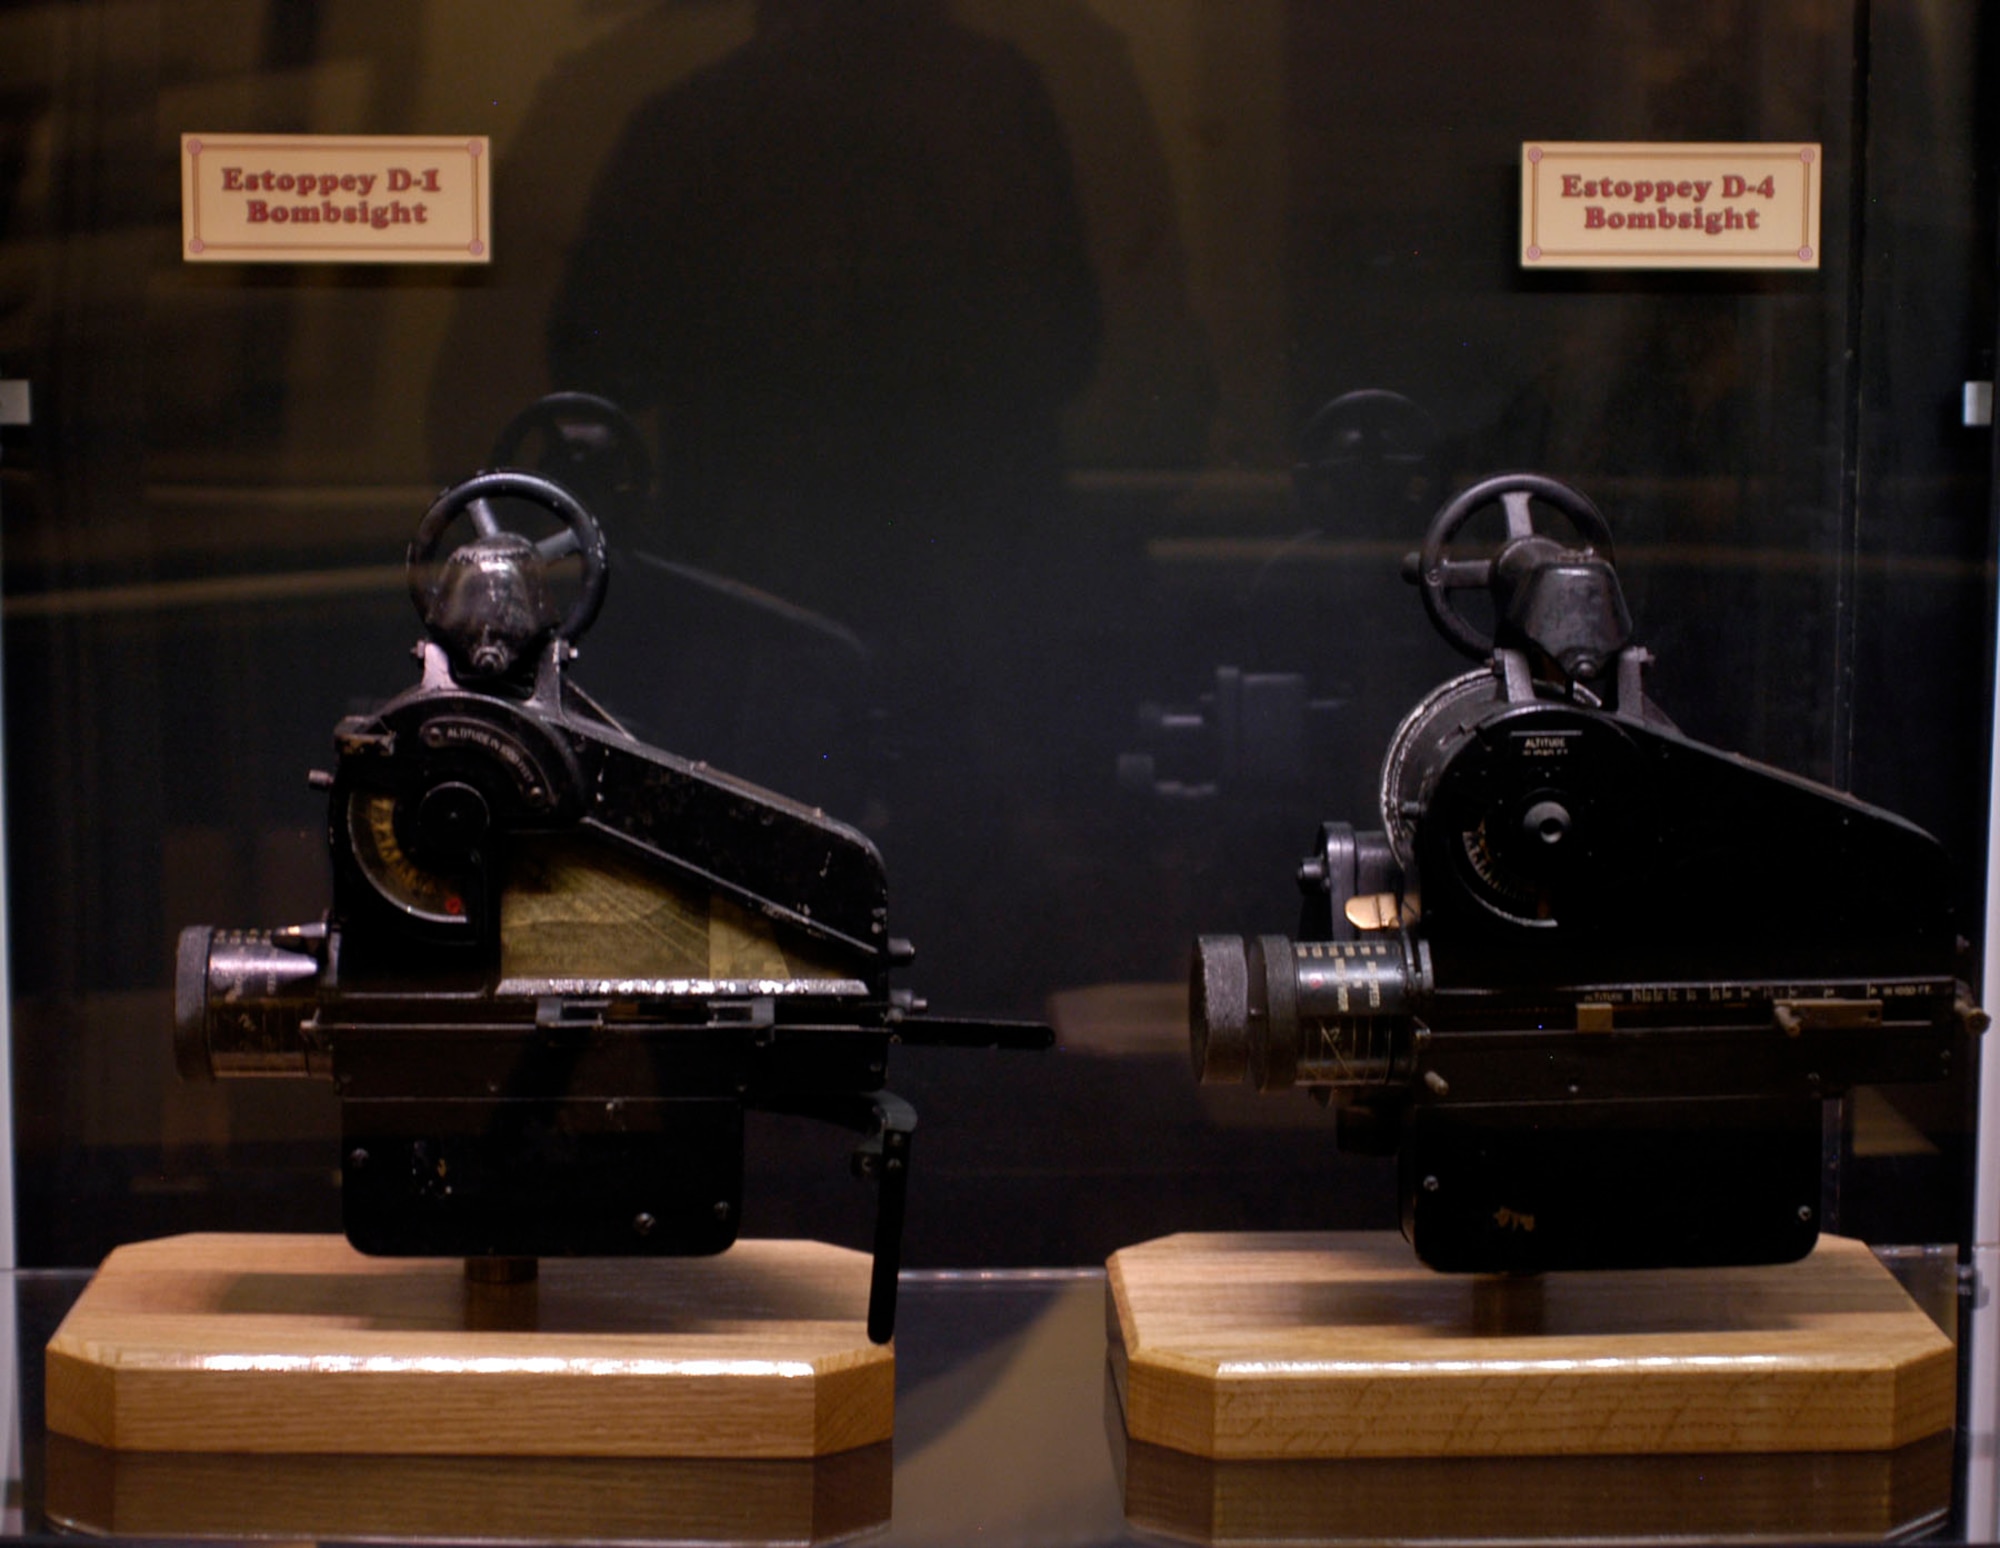 DAYTON, Ohio - Estoppey D-1 and D-4 Bombsights located in the Interwar Bombsight exhibit in the Early Years Gallery at the National Museum of the U.S. Air Force. (U.S. Air Force photo)